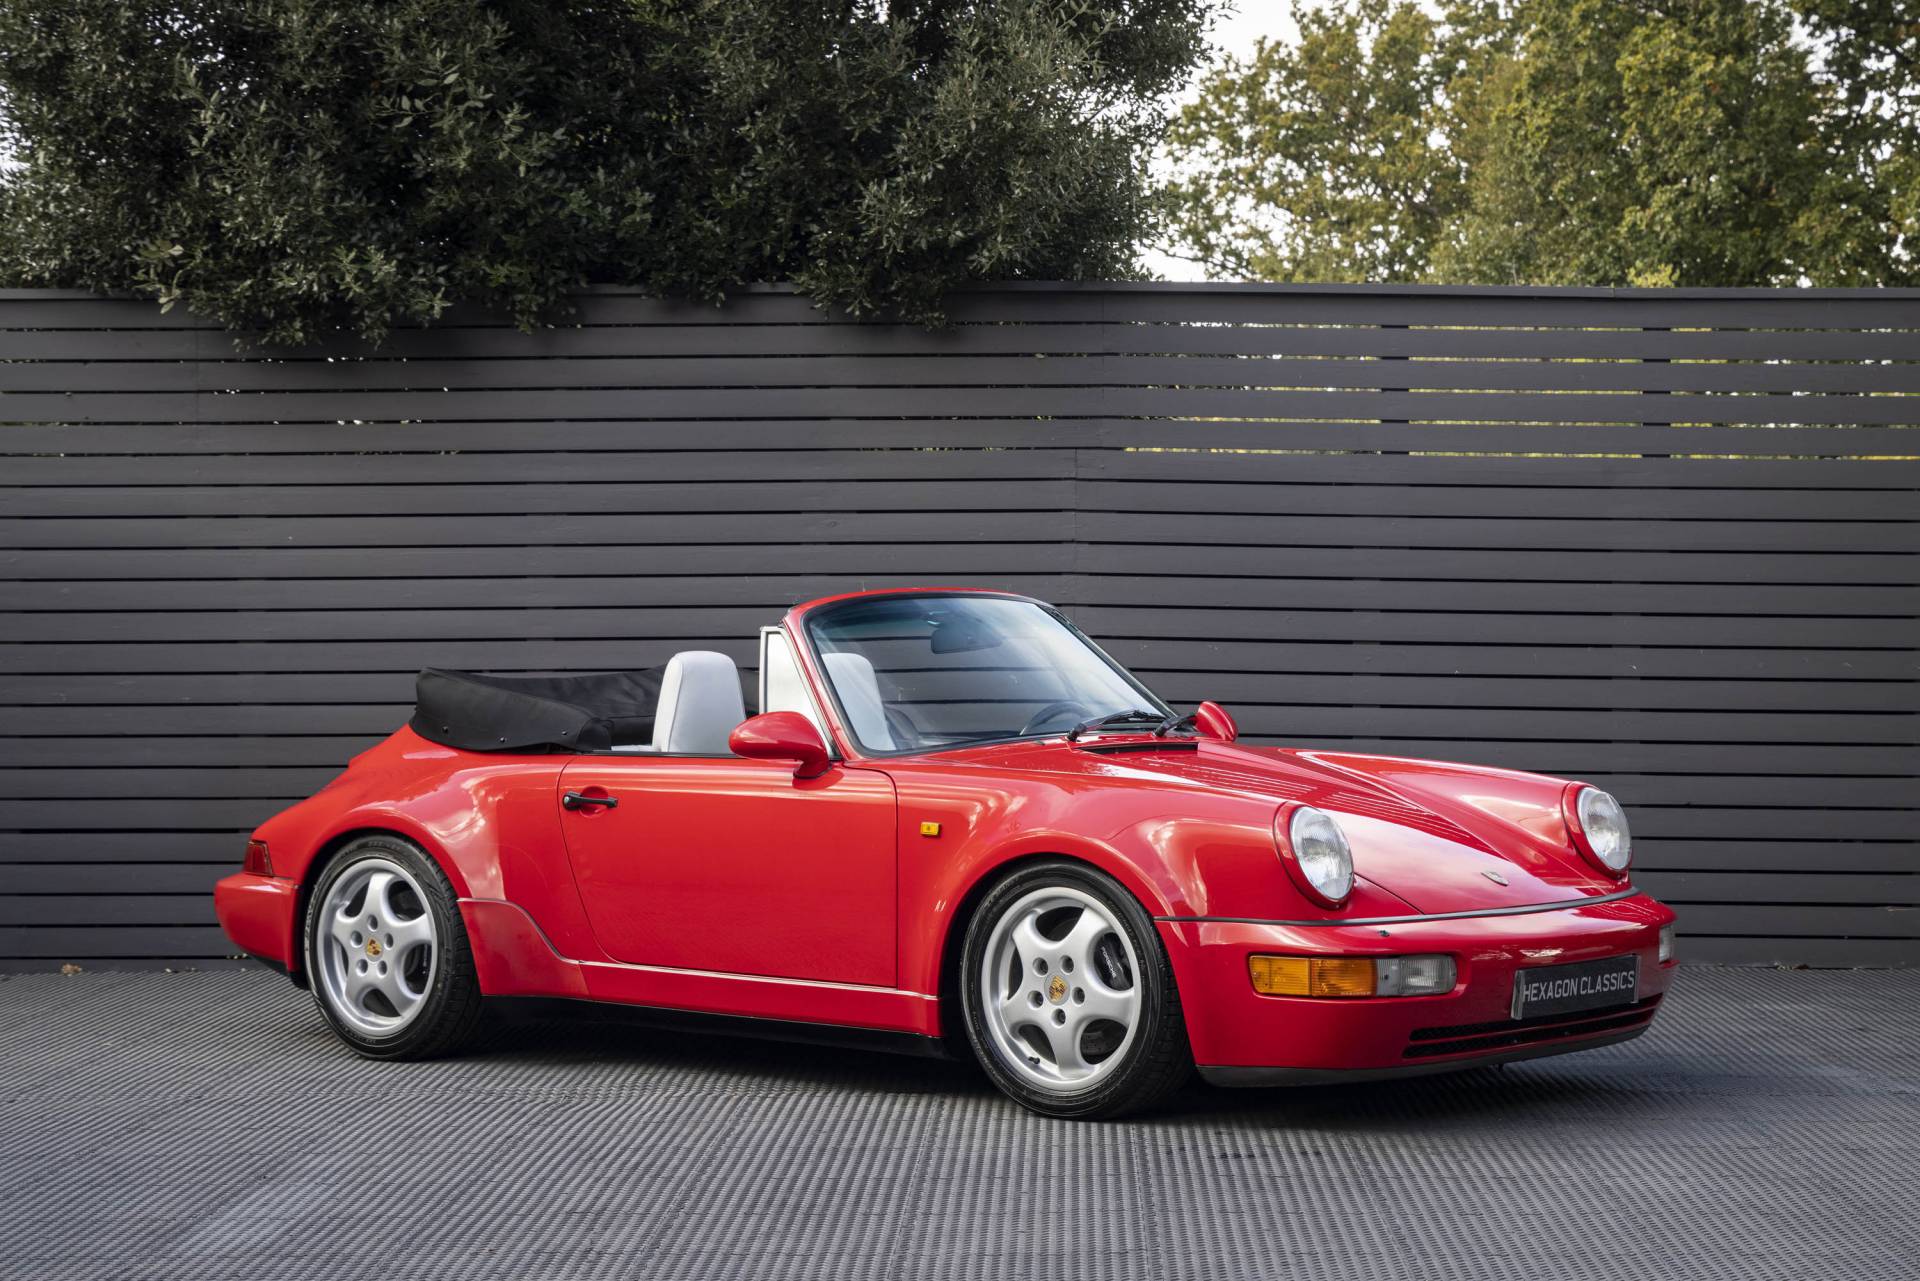 For Sale: Porsche 911 Carrera 2 (WTL) (1992) offered for $198,814